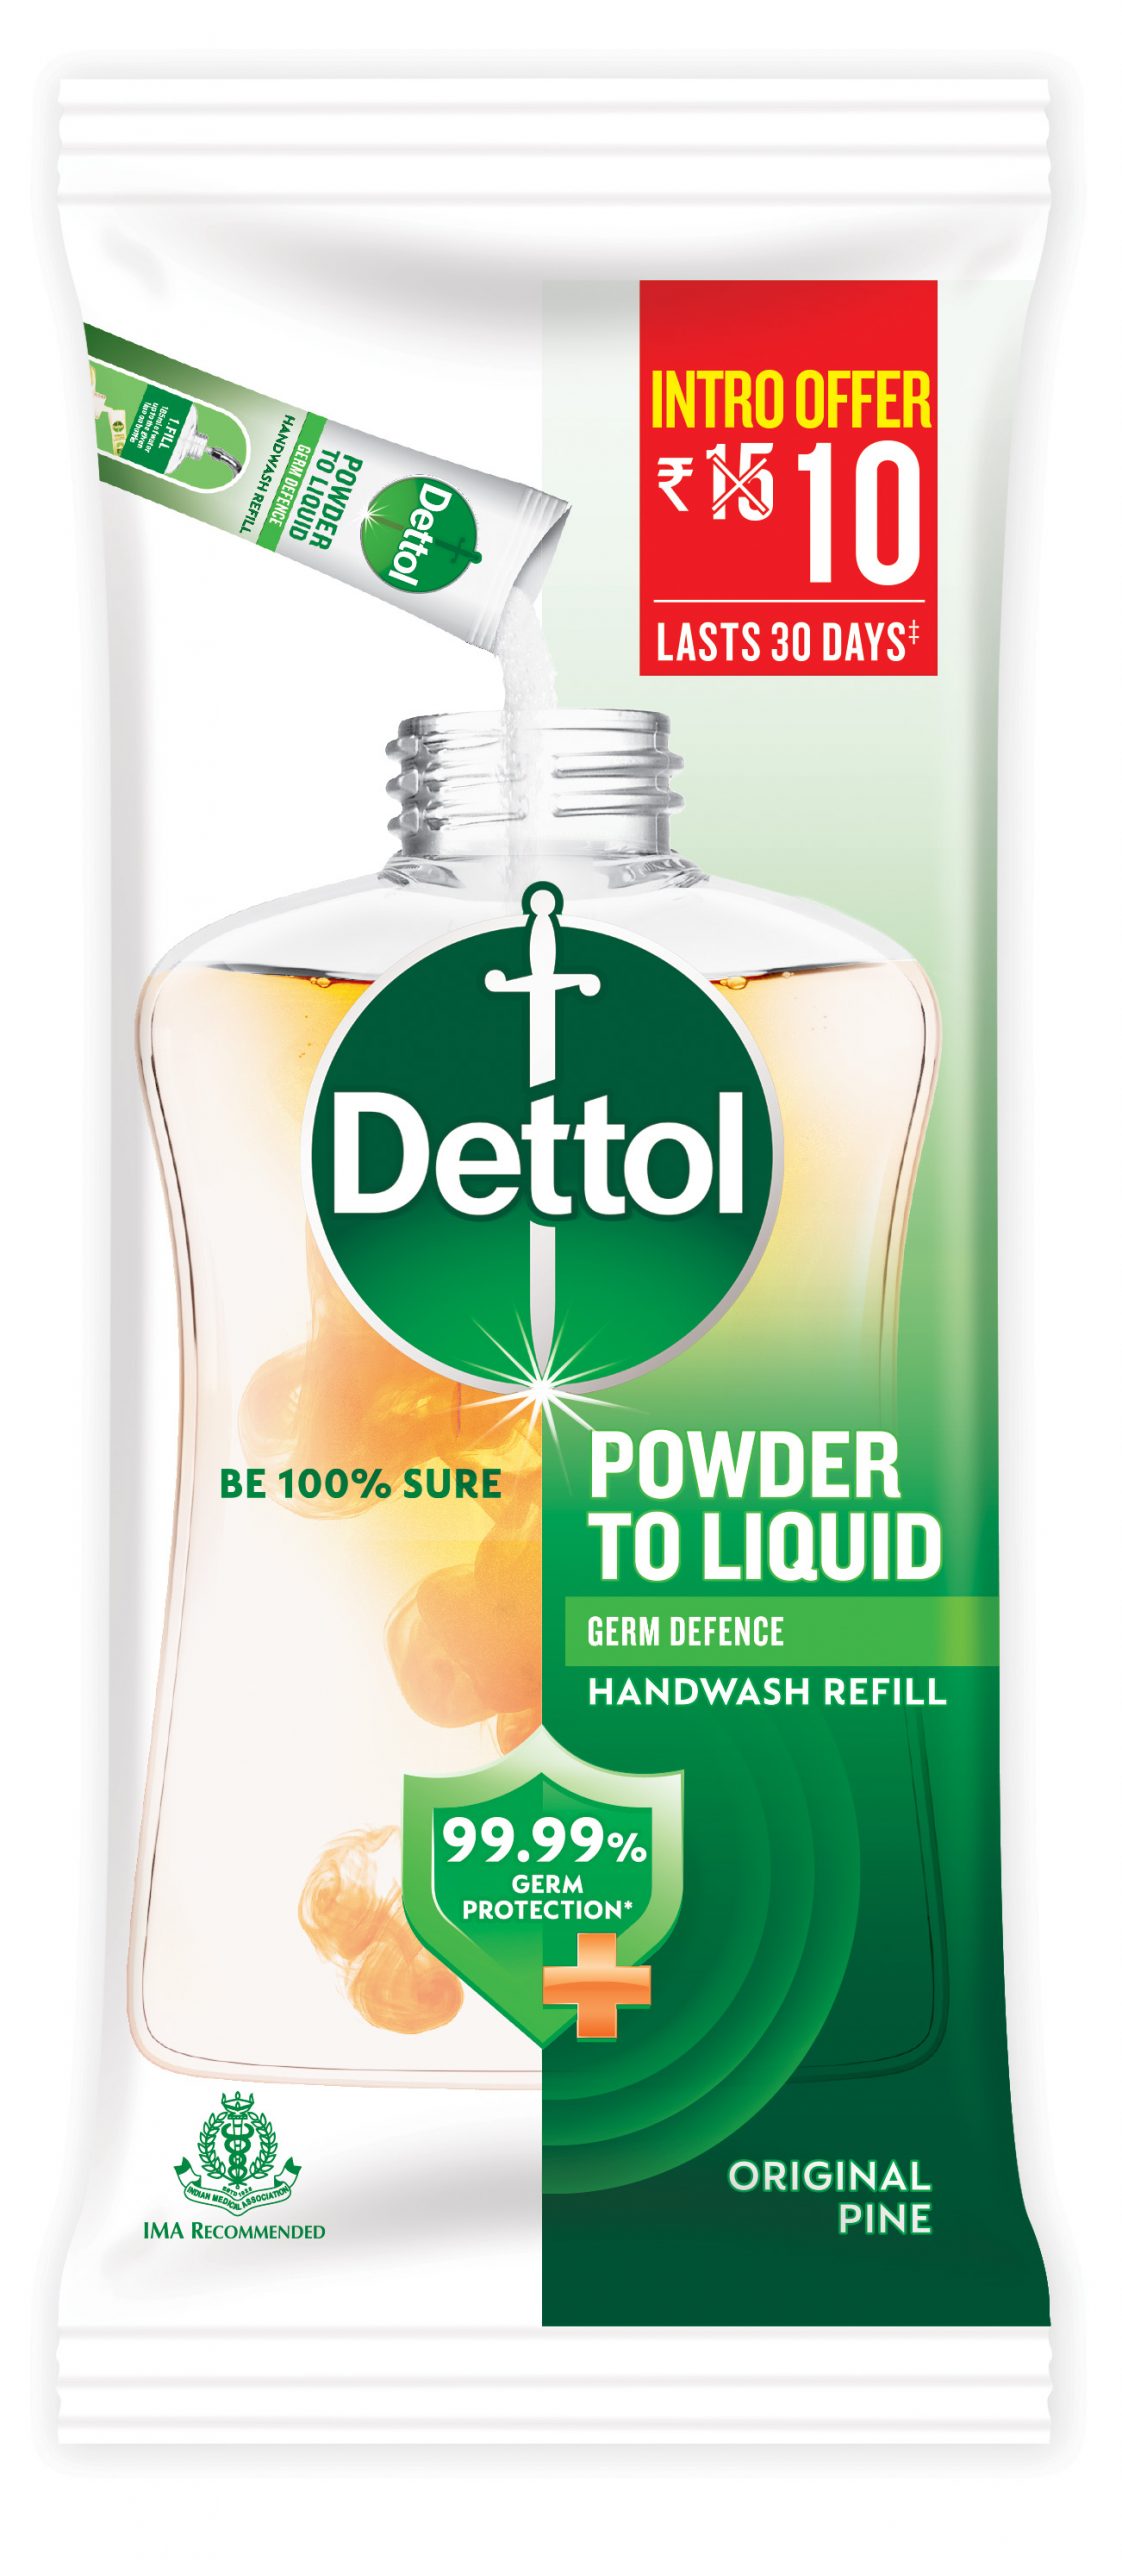 som geleider Versnipperd Dettol expands its product portfolio with the launch of Dettol powder-to-liquid  handwash in India | APN News